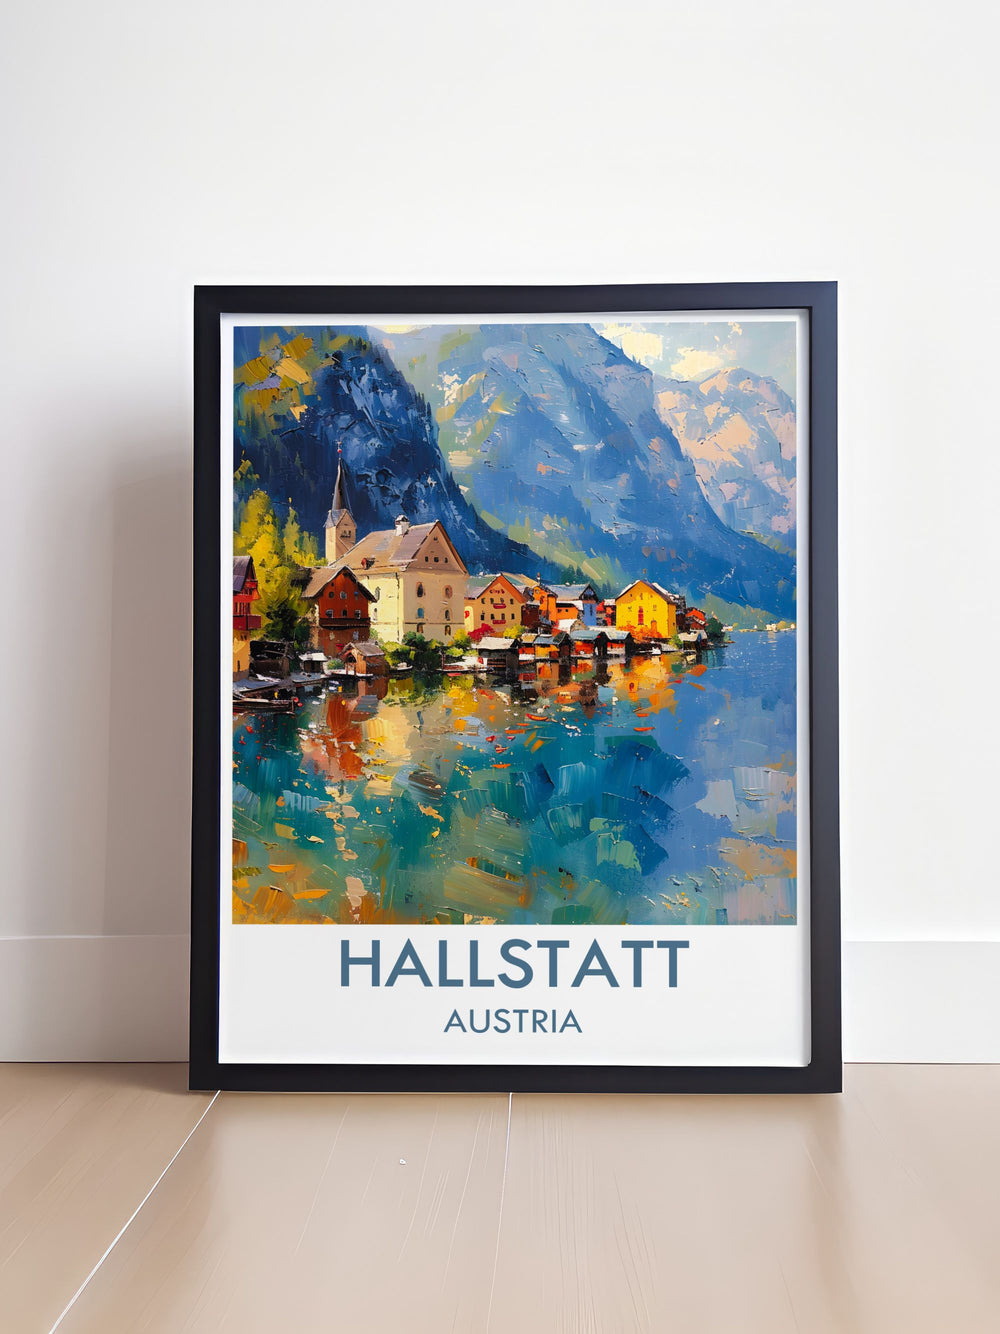 Featuring the serene landscapes of Hallstatt, this travel poster captures the tranquil beauty and picturesque views, perfect for creating a relaxing ambiance in any room.